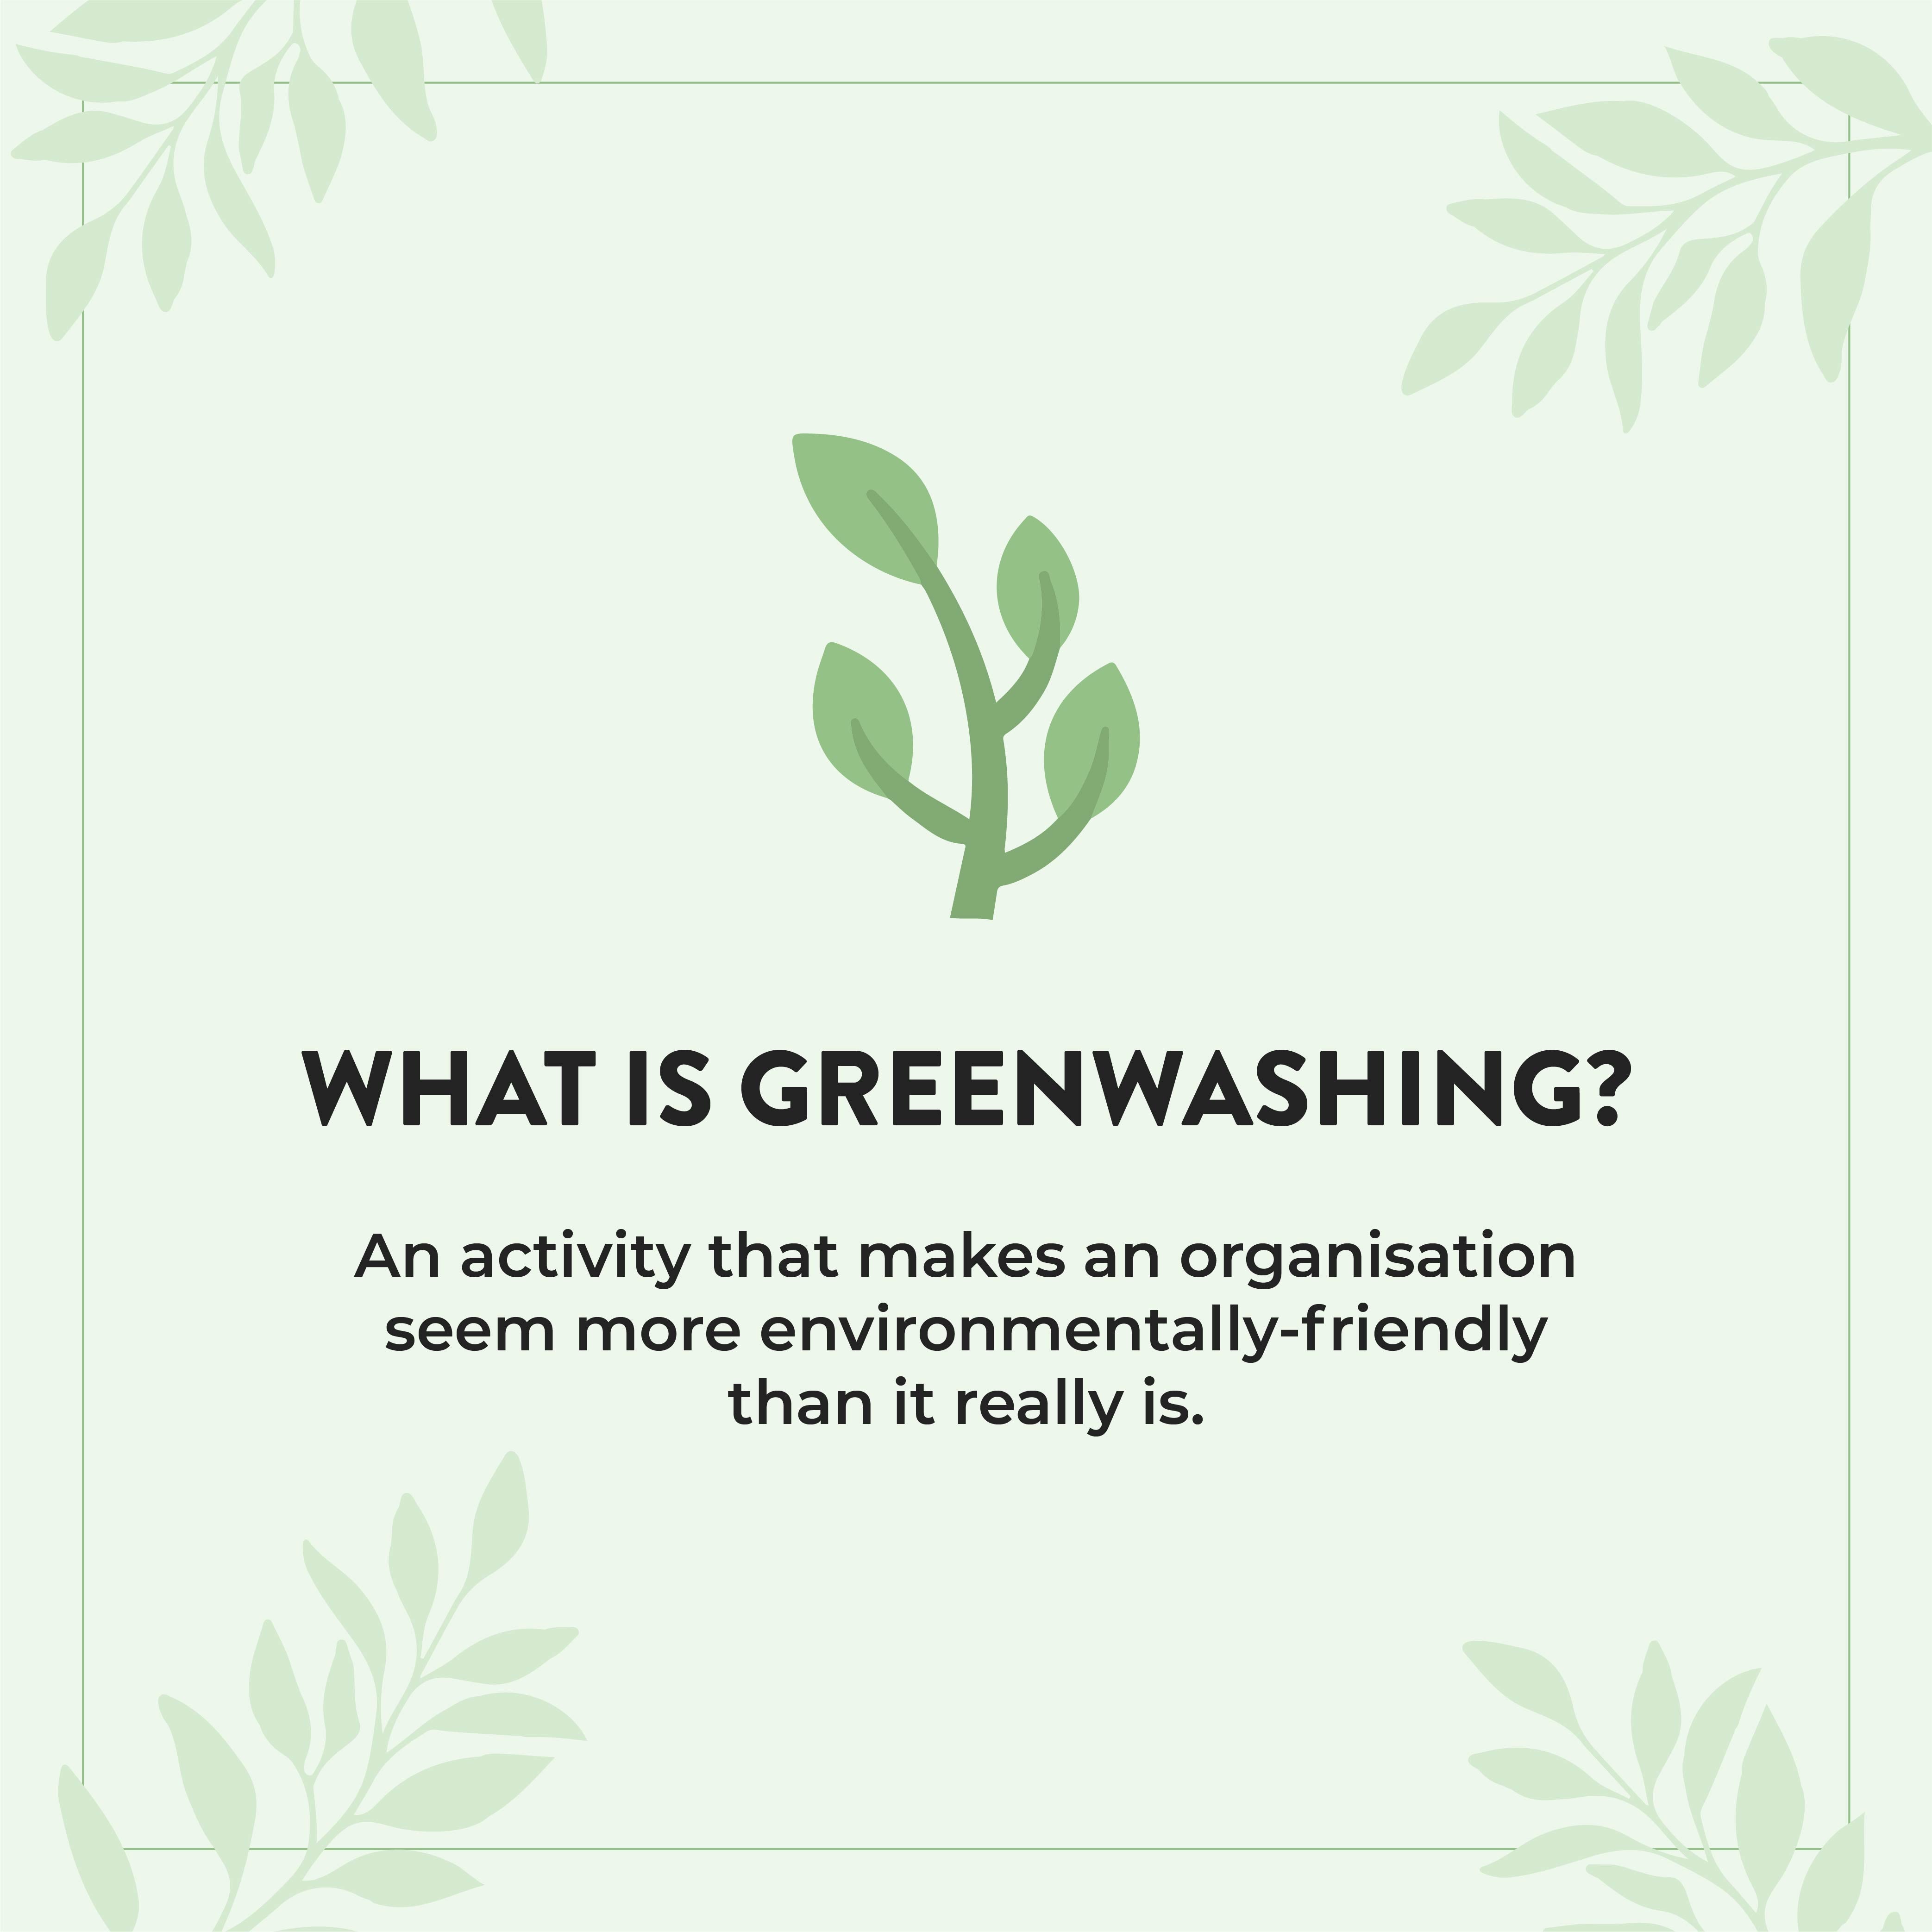 This is an image of what is greenwashing